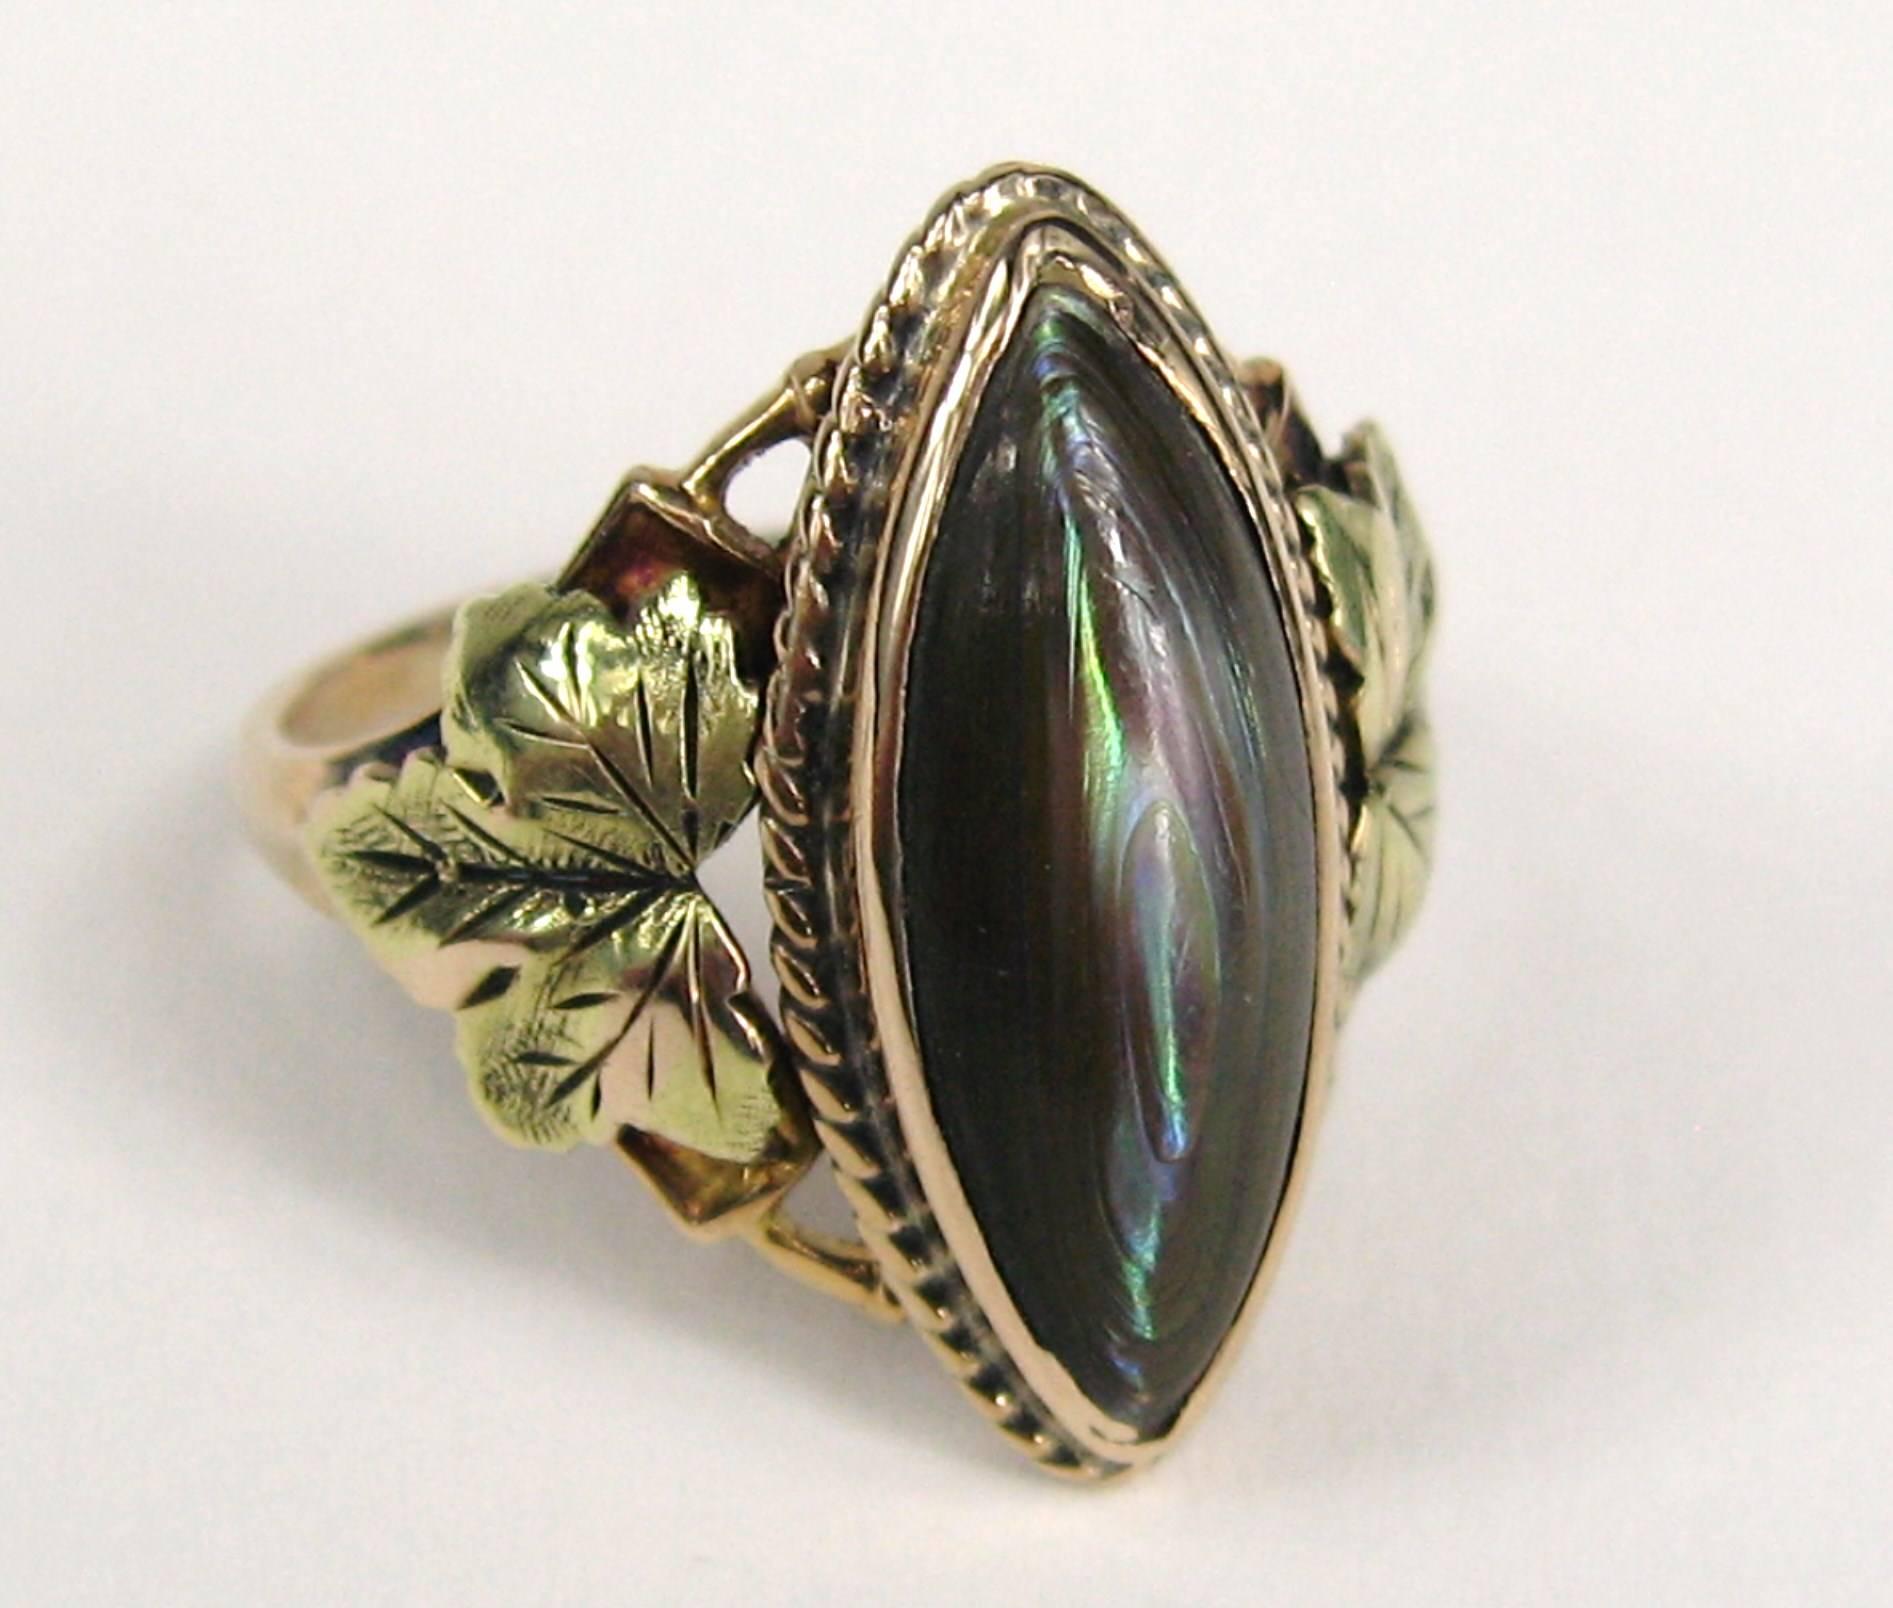 Lovely Elongated Abalone set in a 10K Tricolored Gold setting. Floral motif on each side of the shank. Ring is a size 5.5 and can be sized by us or your jeweler. Be sure to check our storefront for more fabulous pieces from this collection. We have